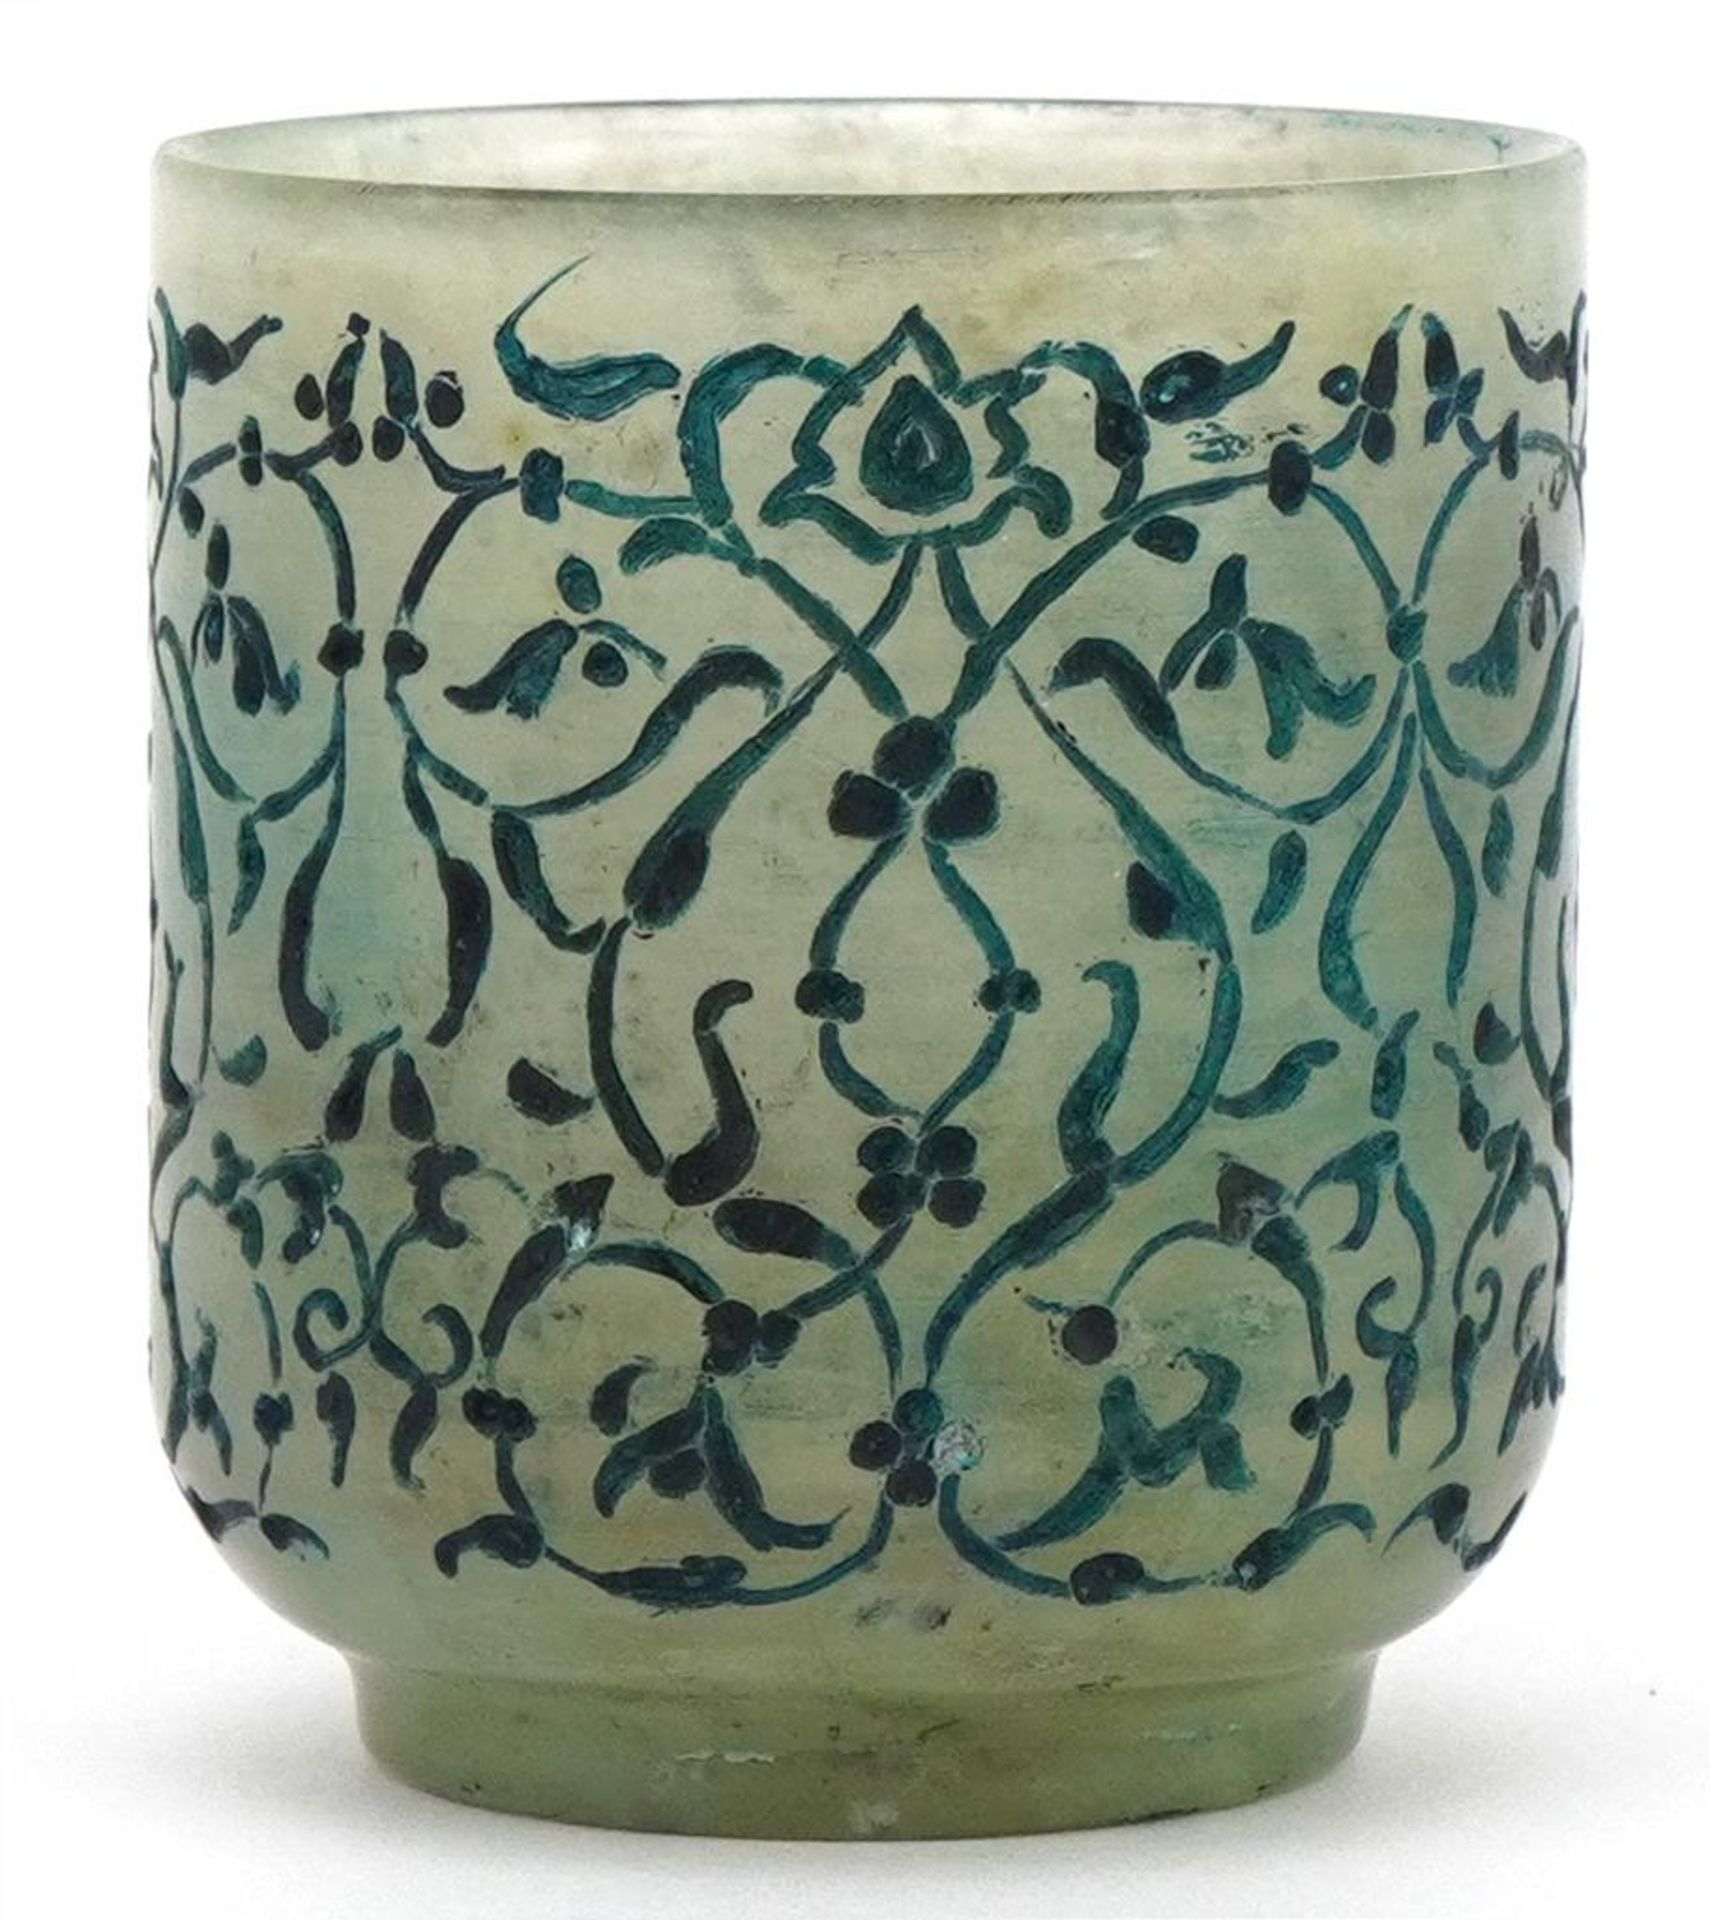 Islamic pale green jade cup carved with foliage : For further information on this lot please visit